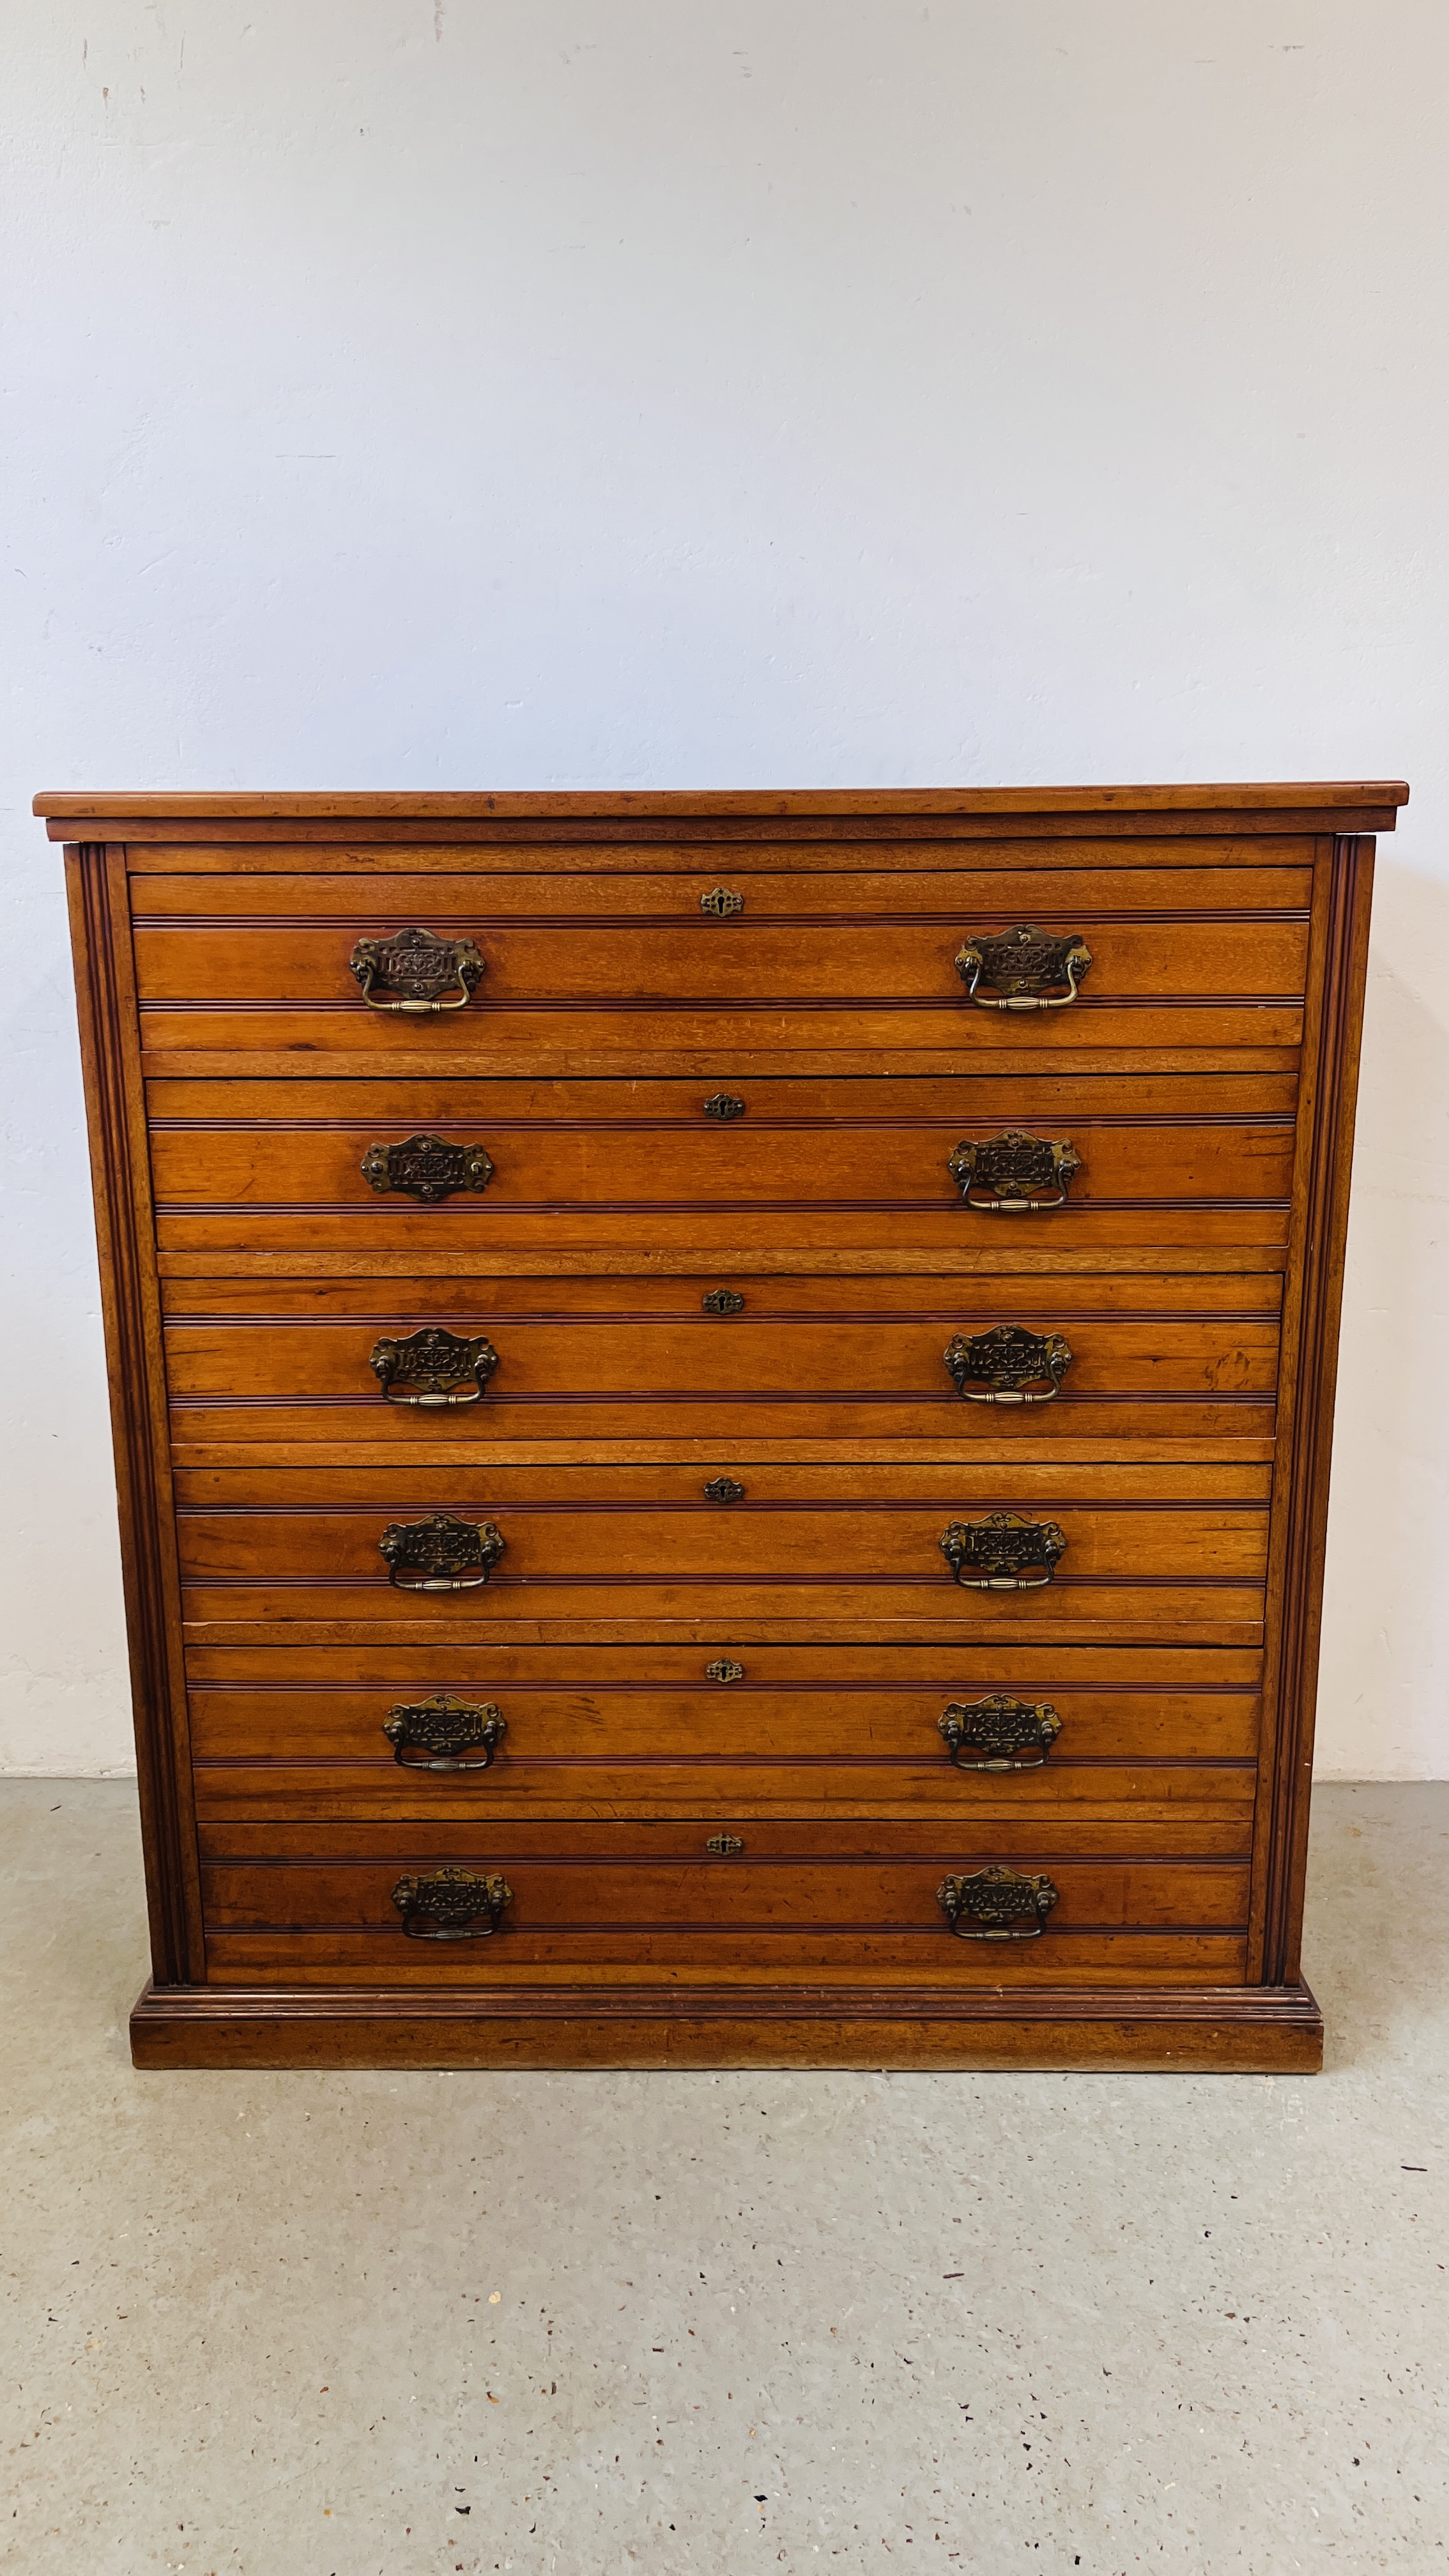 AN EDWARDIAN AMERICAN WALNUT 6 DRAWER CHEST WITH BRASS PLATE HANDLES W 112CM. D 46CM. H 118CM. - Image 2 of 14